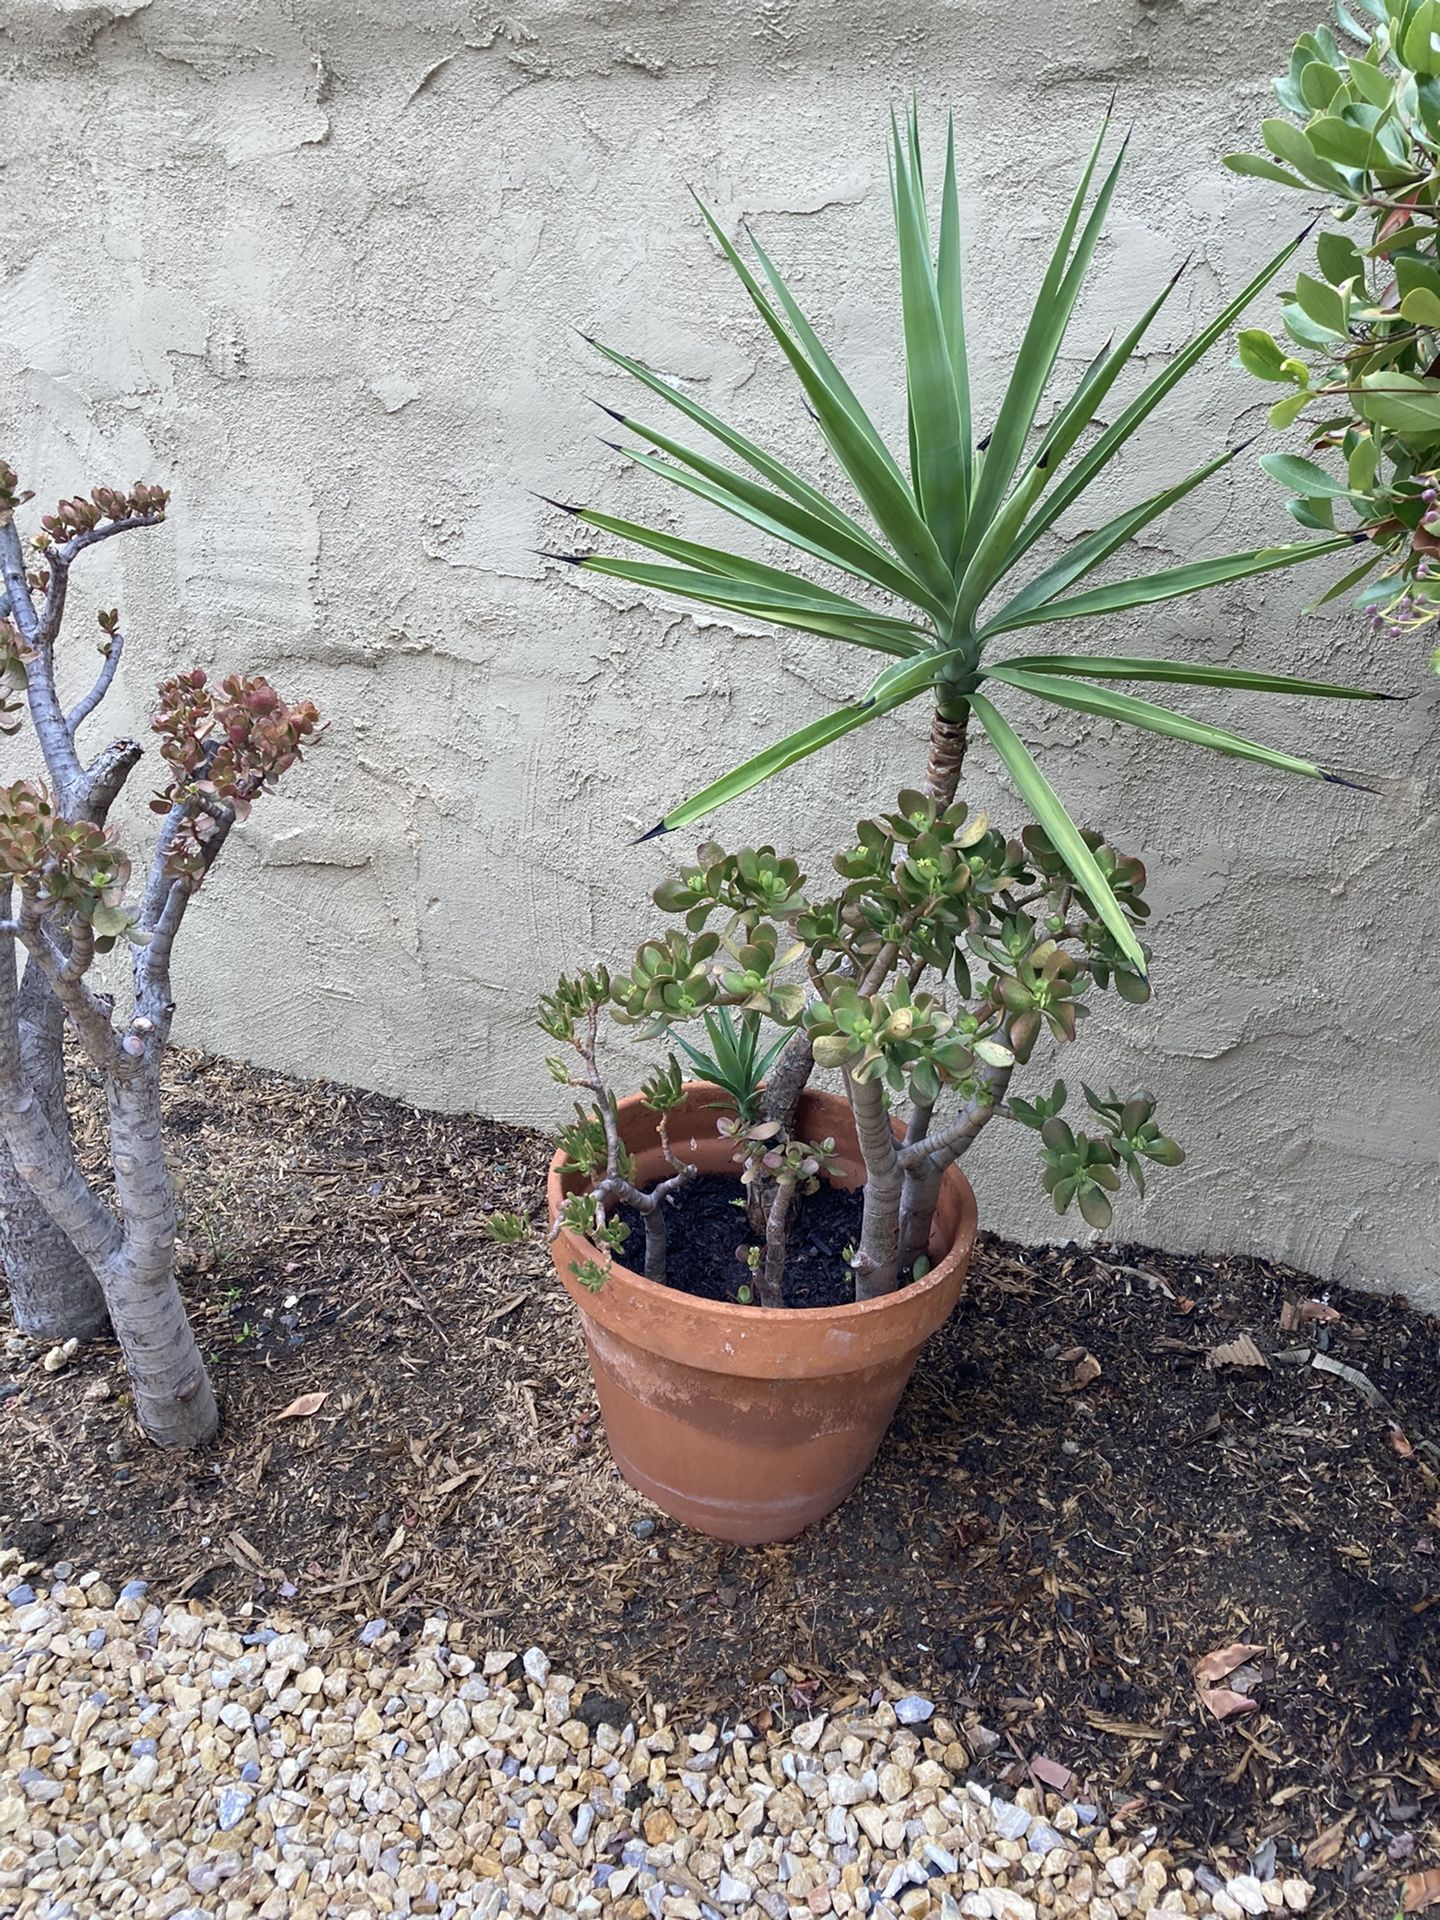 Potted plant w yucca and succulent